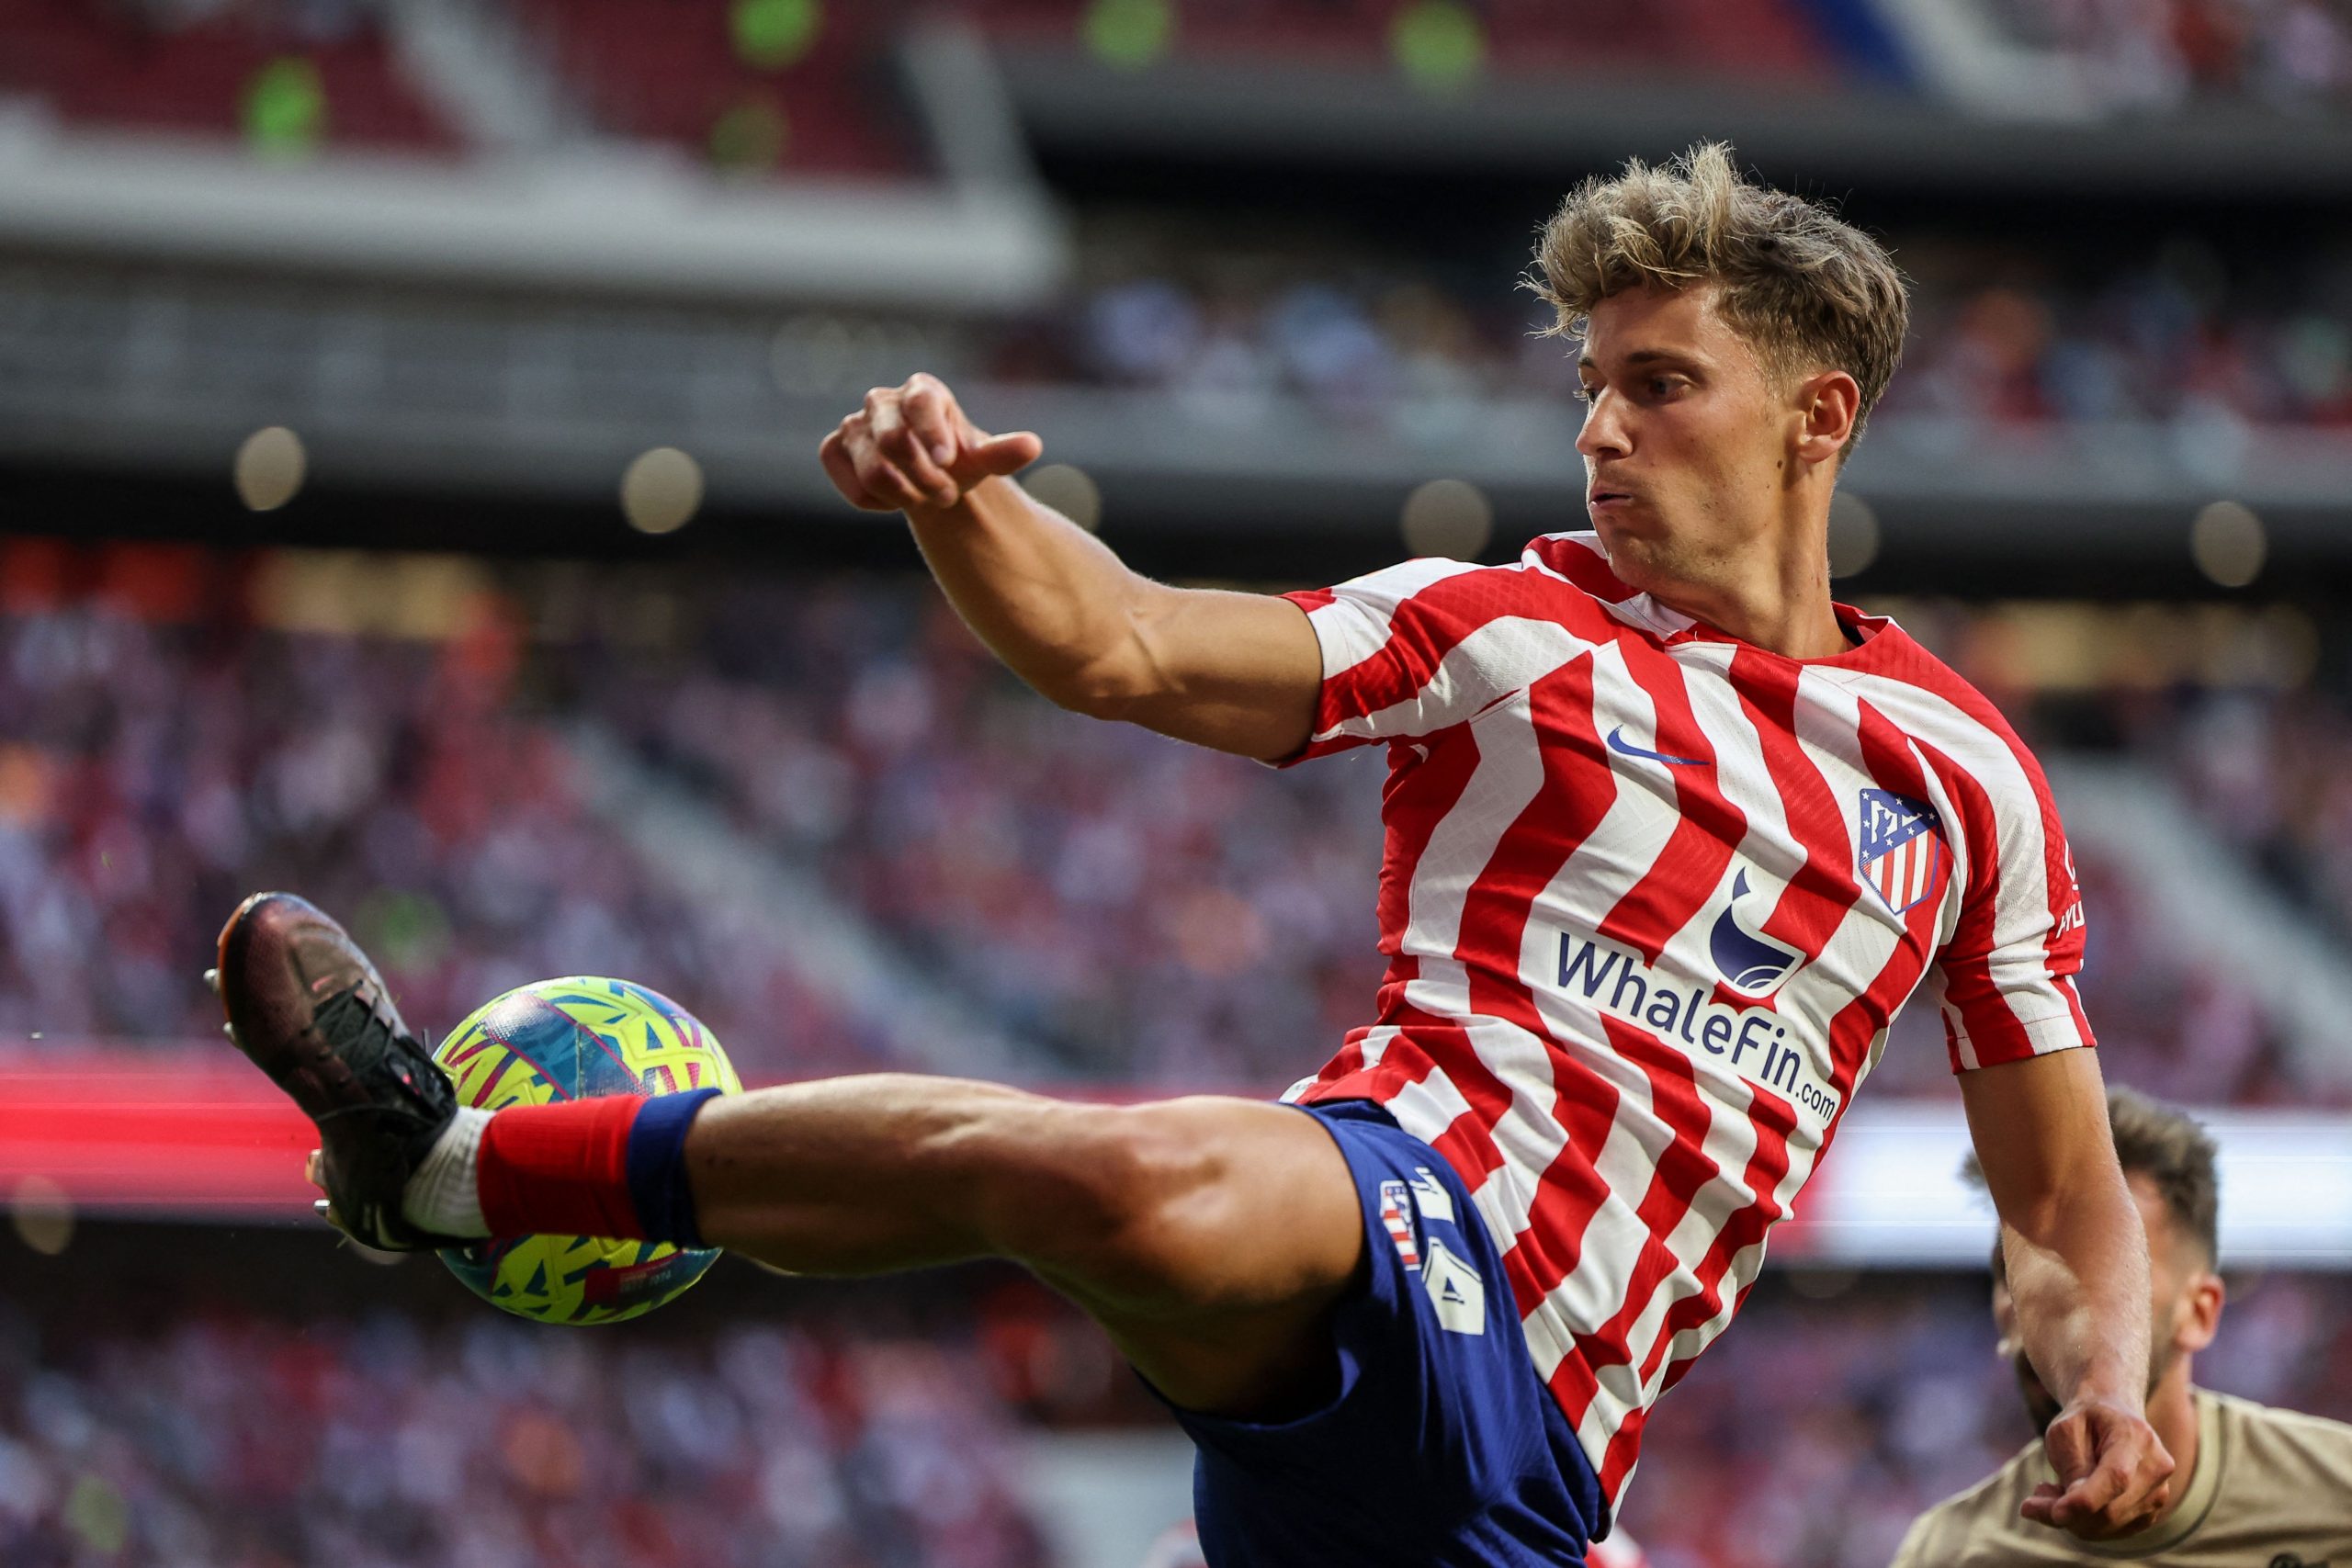 Atletico Madrid midfielder Marcos Llorente being eyed by Manchester United and Liverpool.